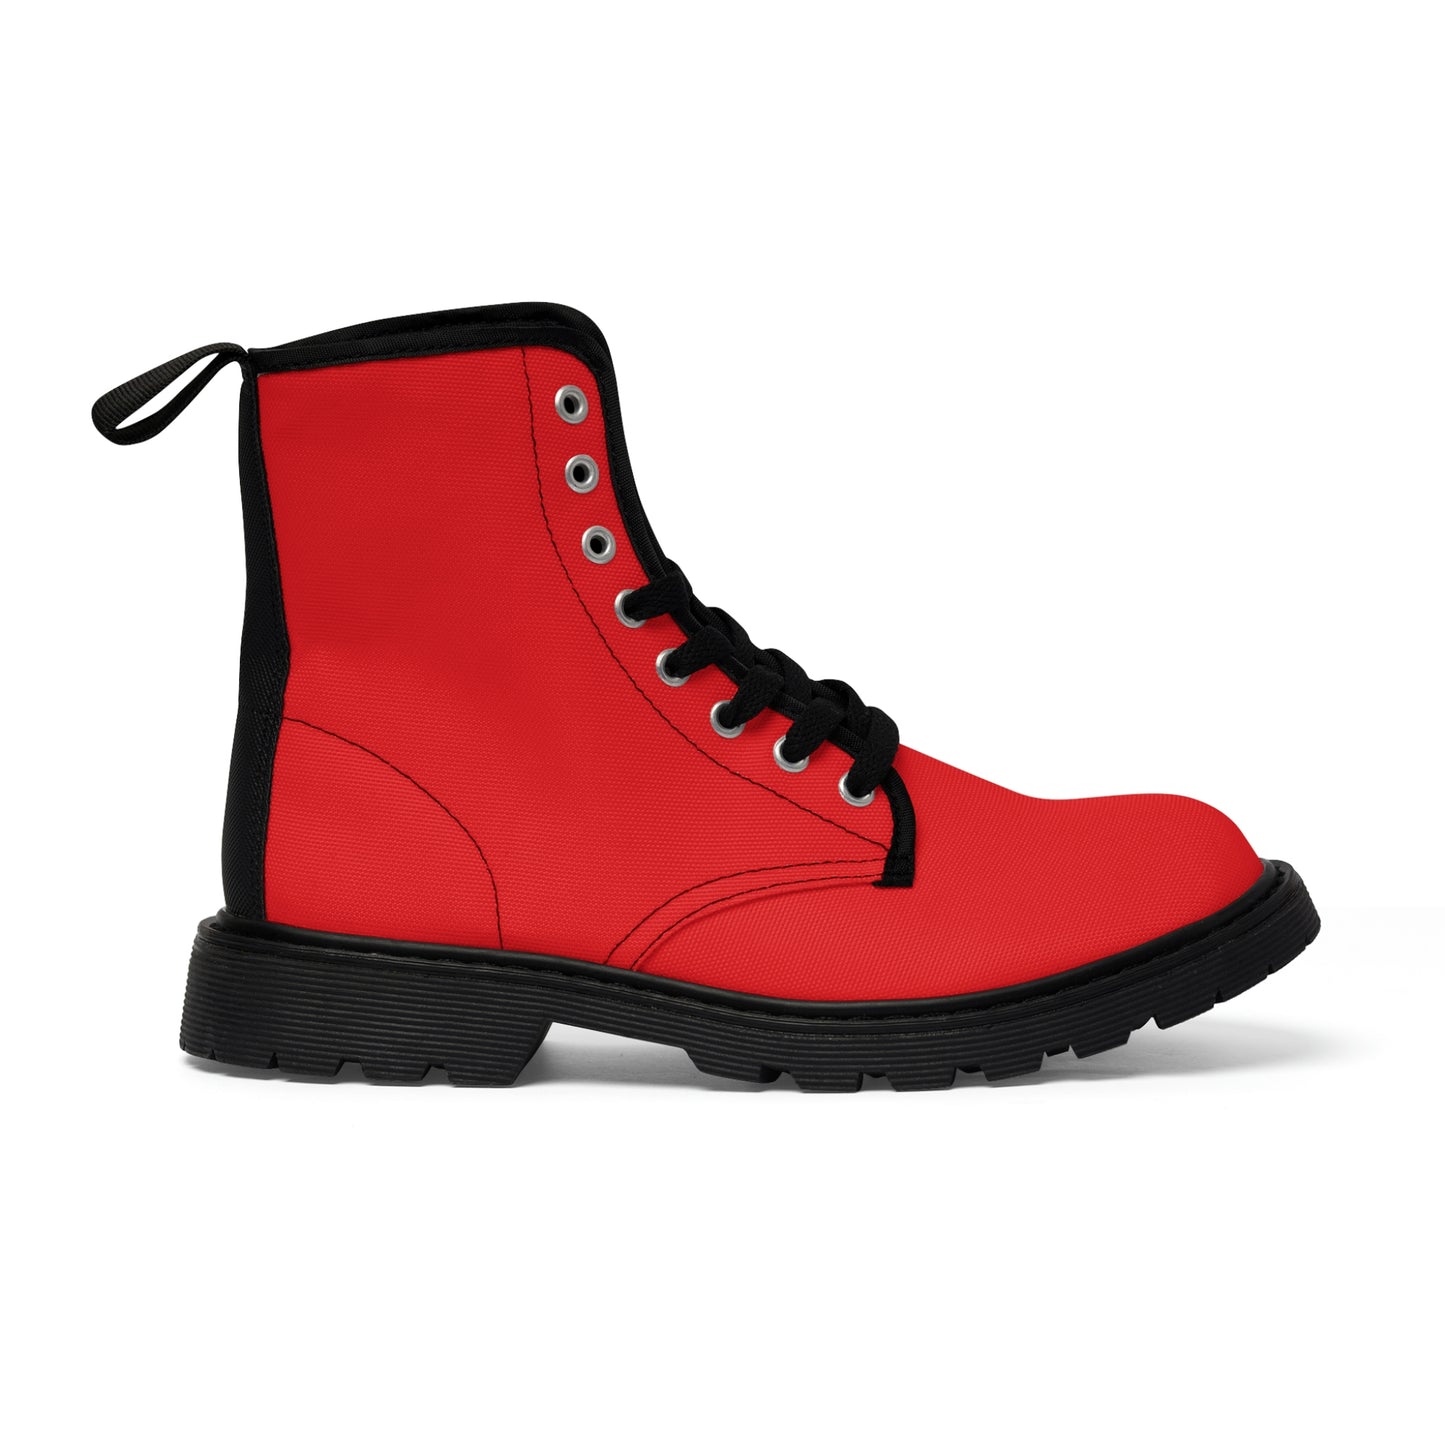 DM Women's Canvas Boots - Red